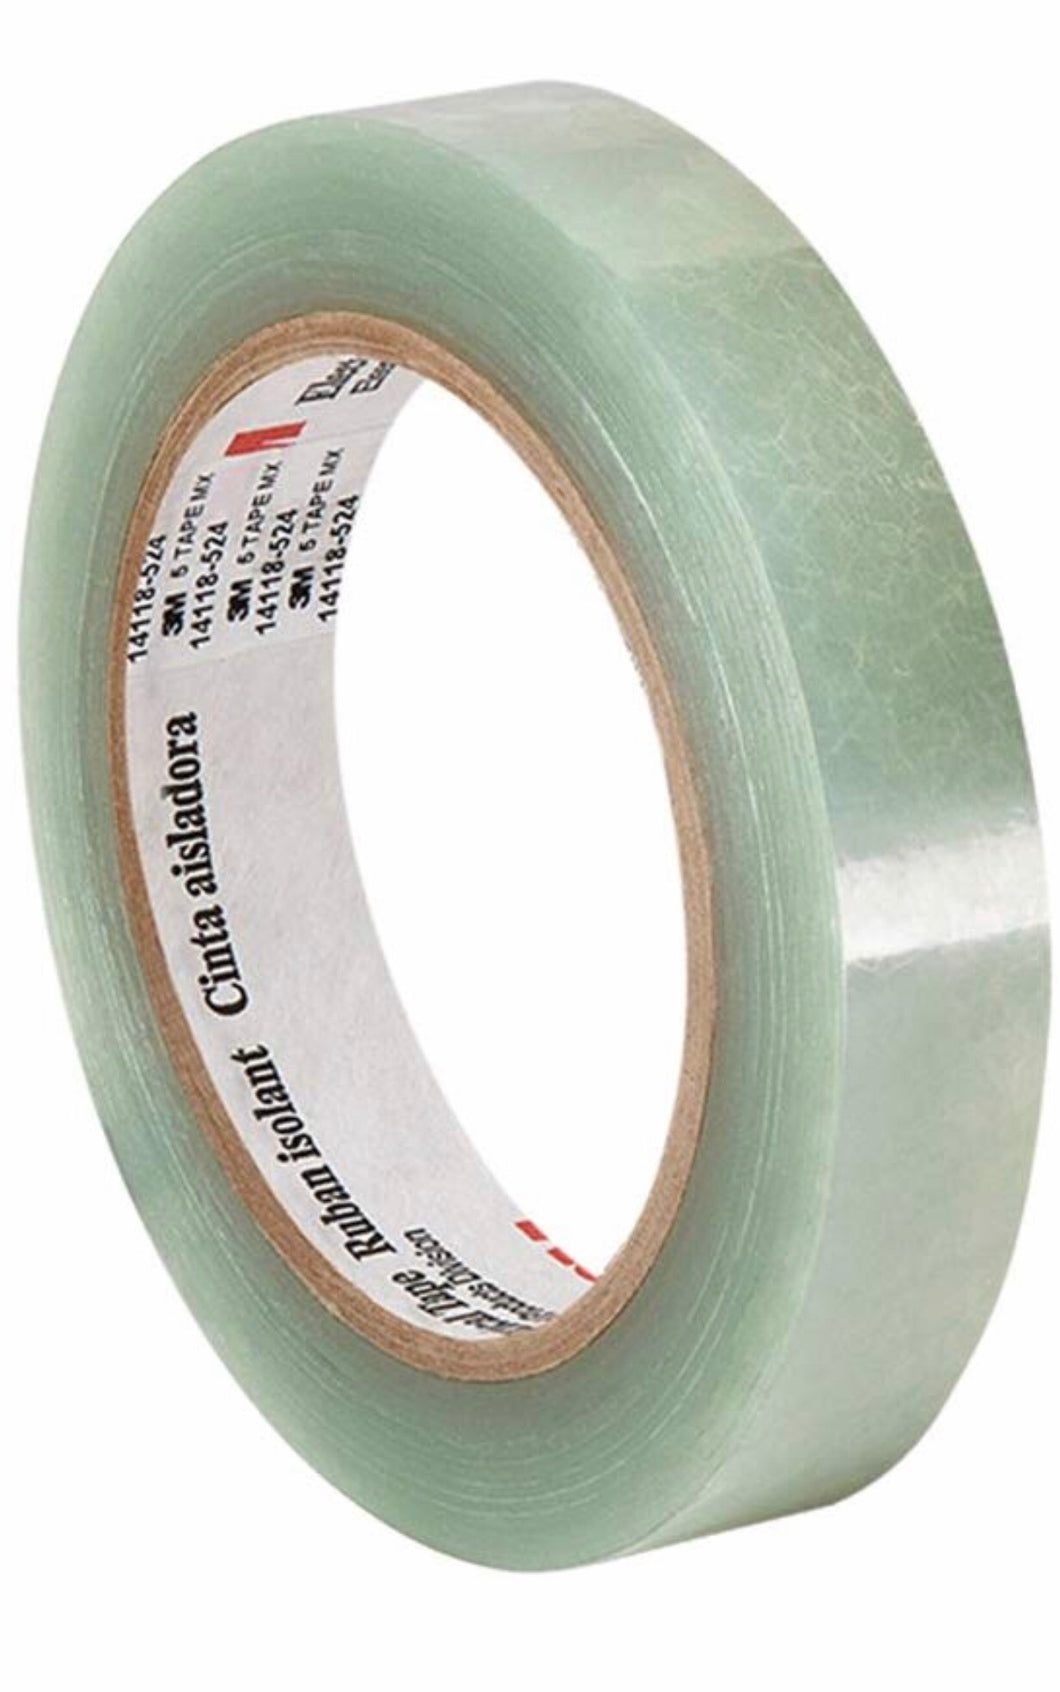 Works great in all temps, and leaves no residue! Genuine 3M tape. 3/4” wide. Clear.